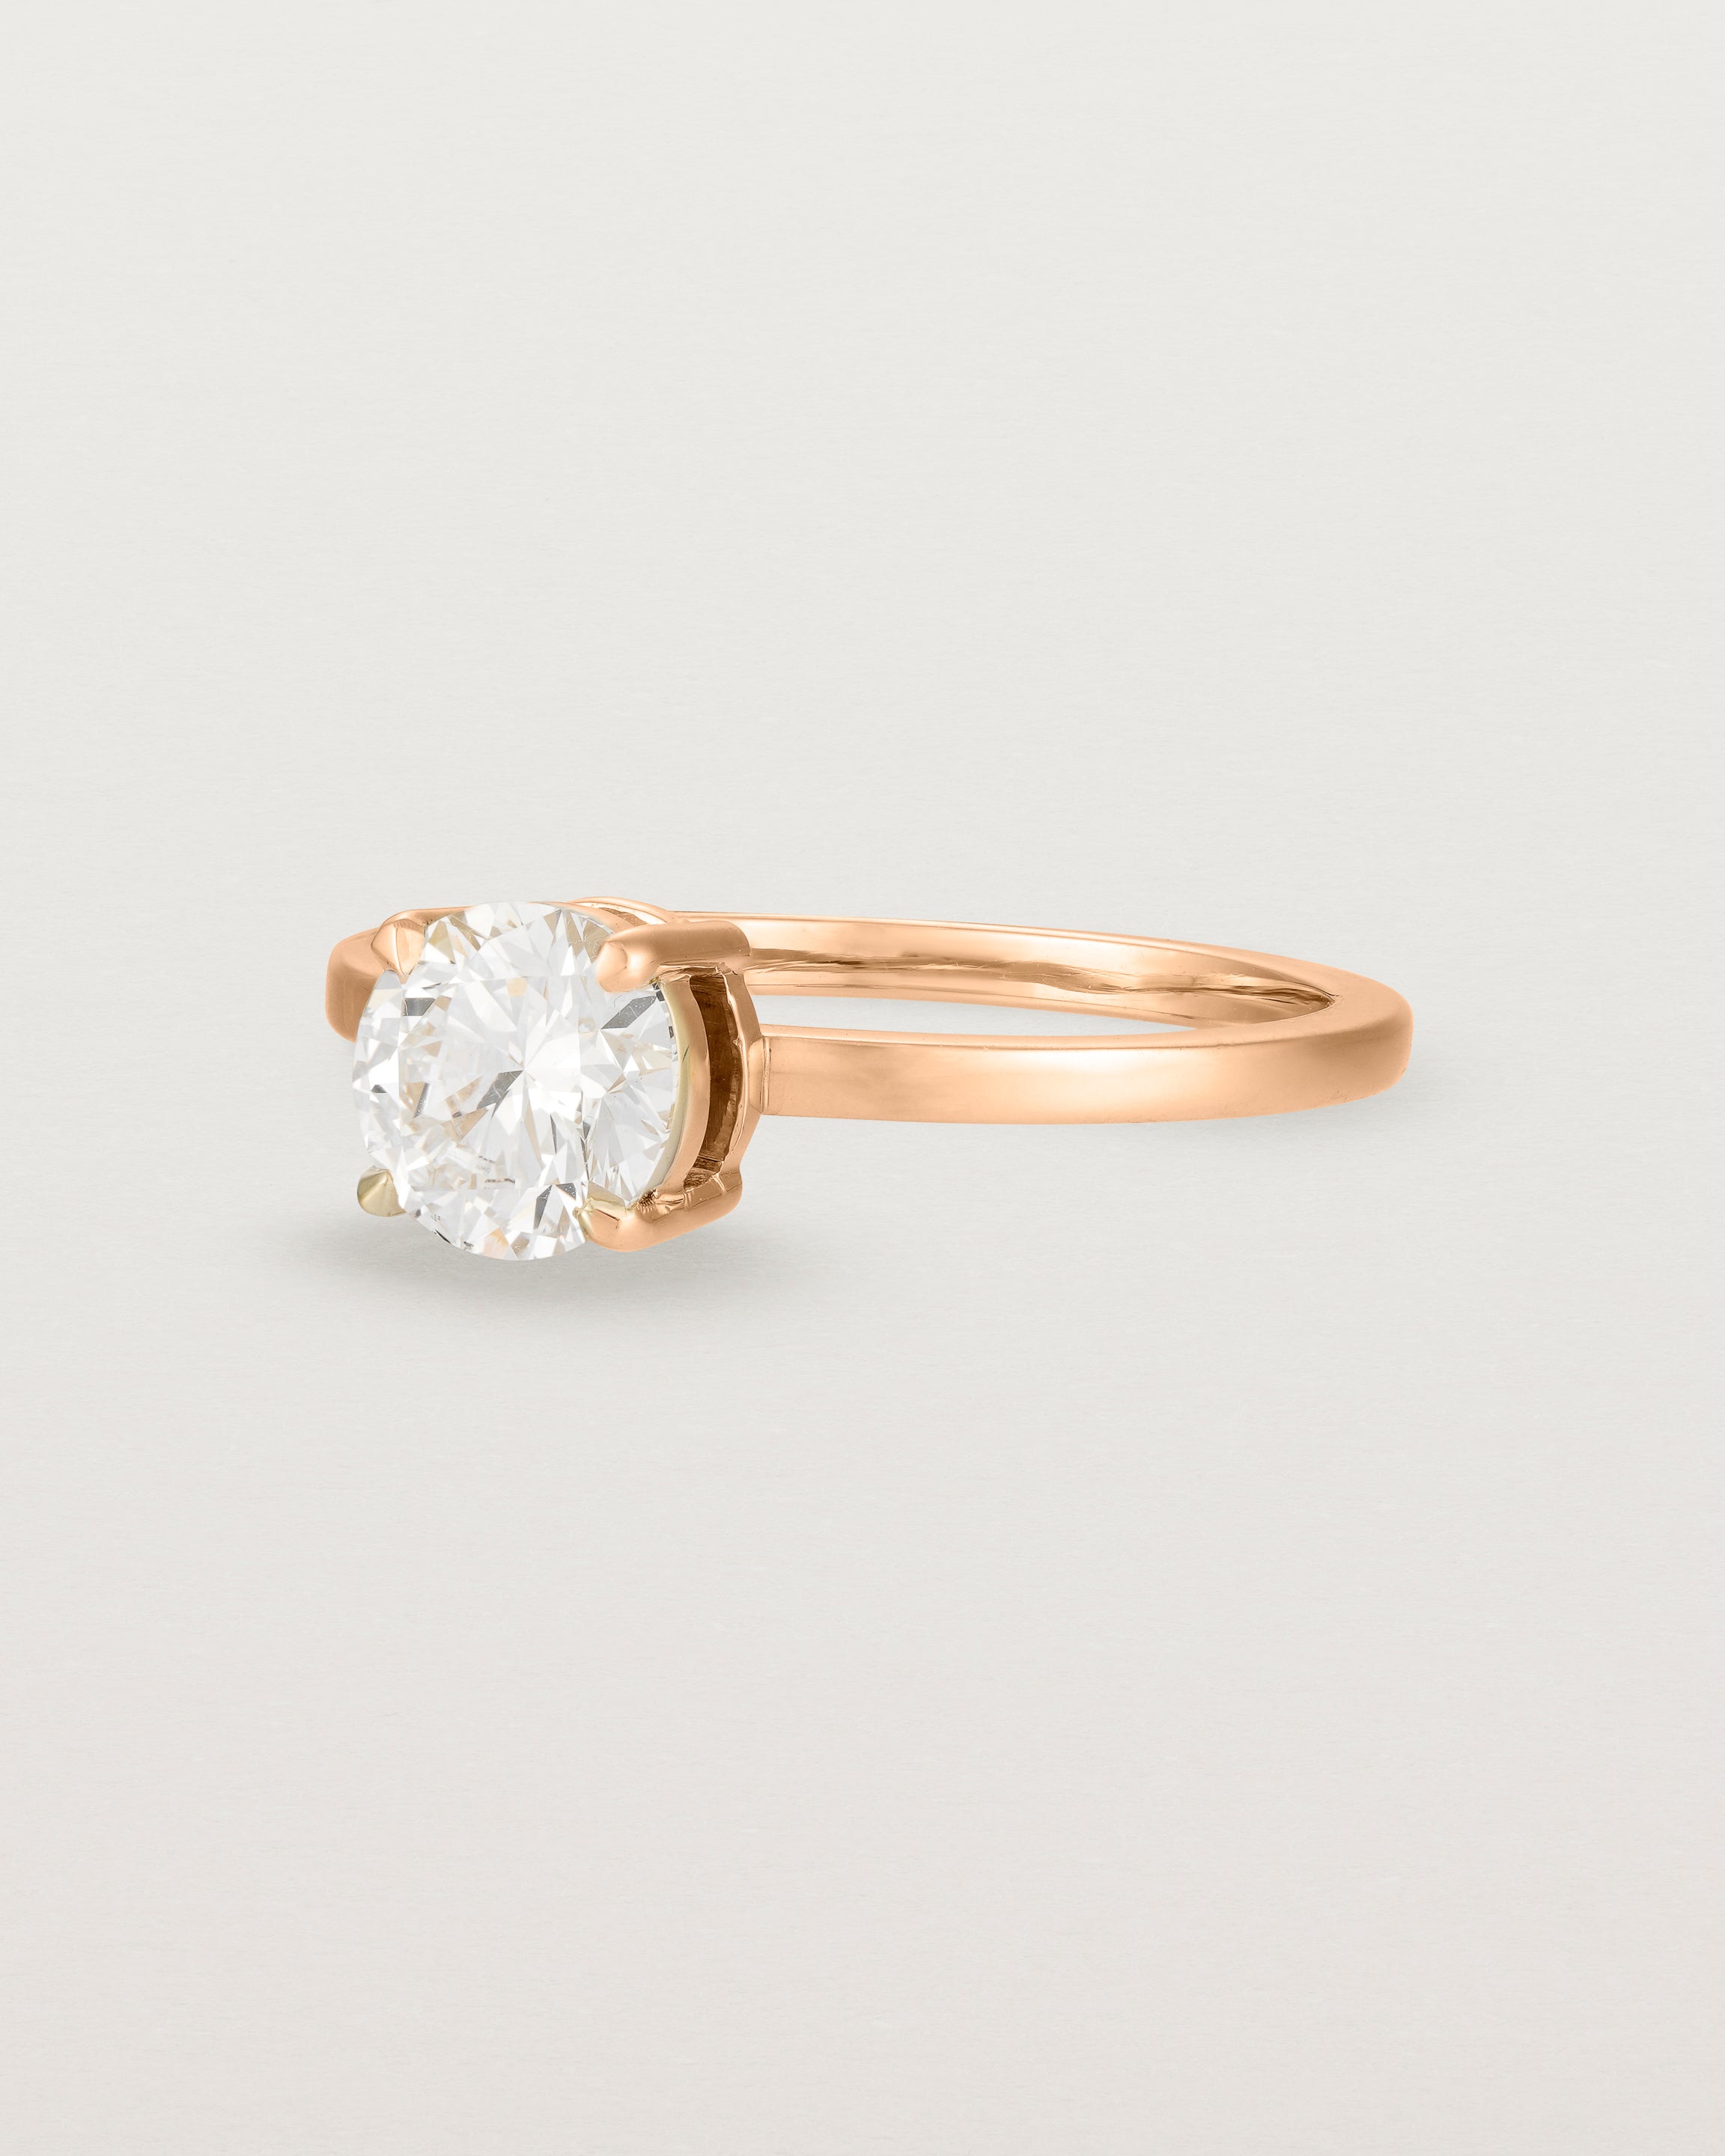 Angled view of the Petite Una Round Solitaire | Laboratory Grown Diamond | Rose Gold.